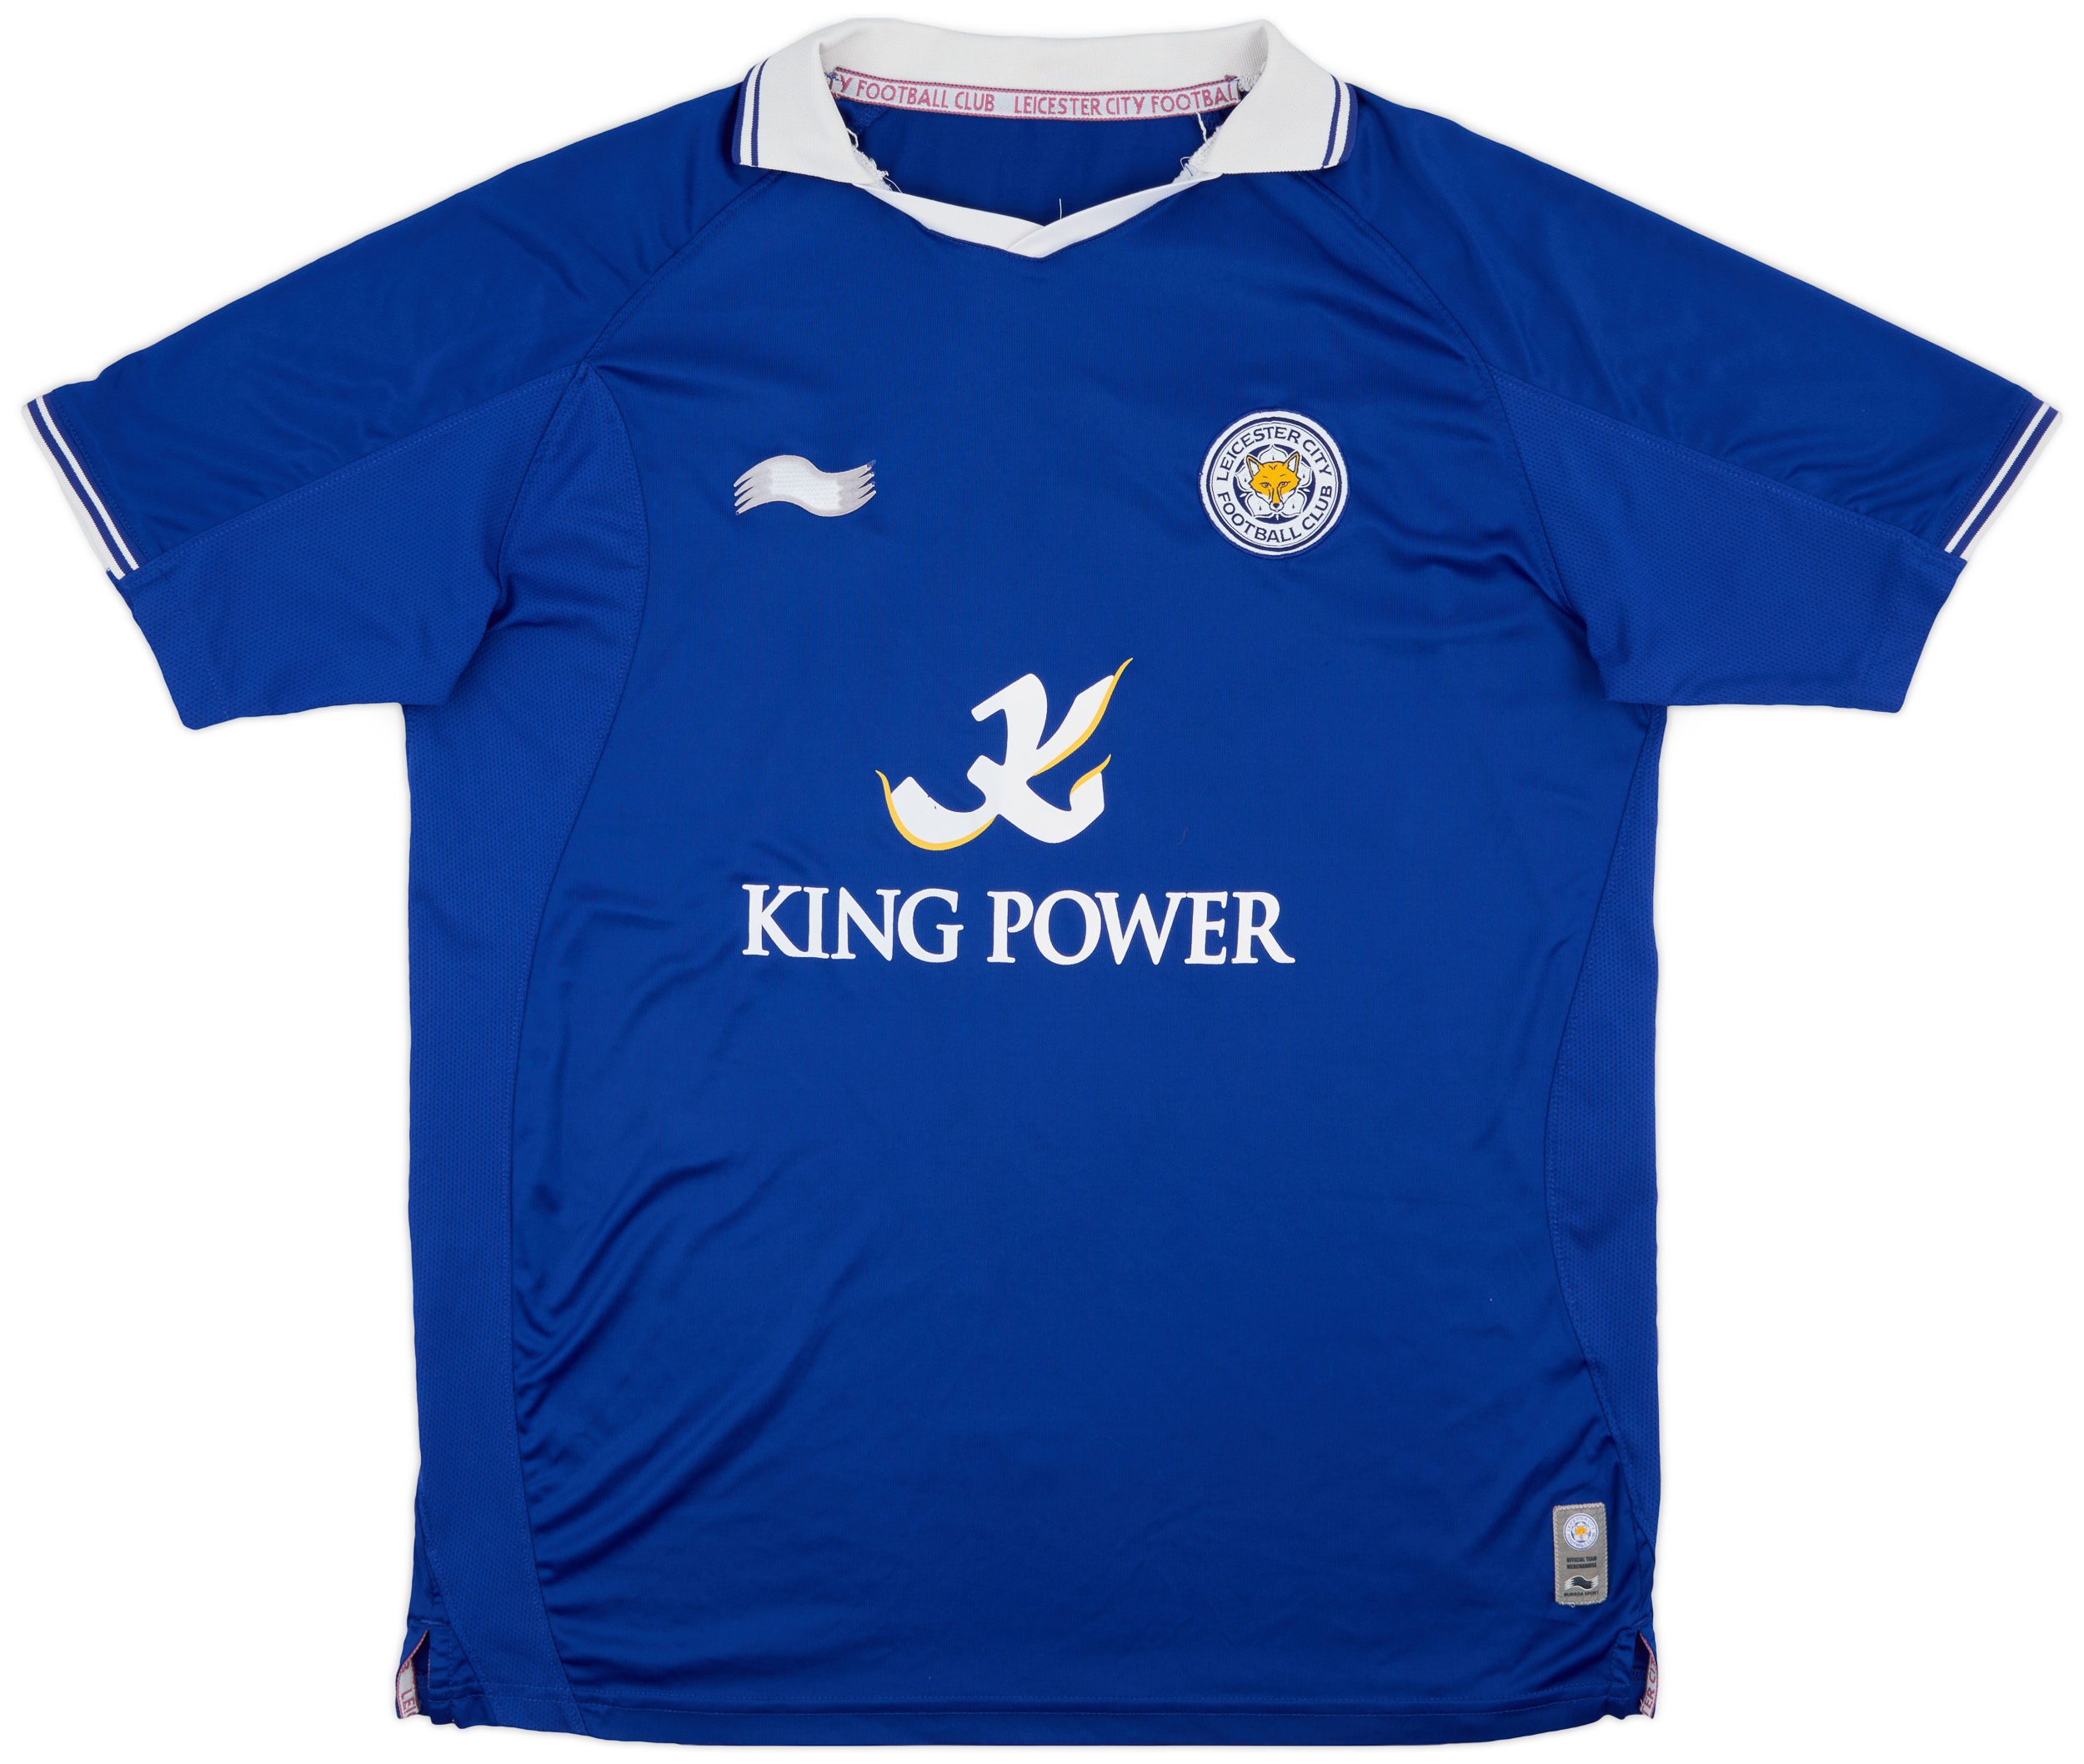 2011-12 Leicester Home Shirt - 8/10 - ()